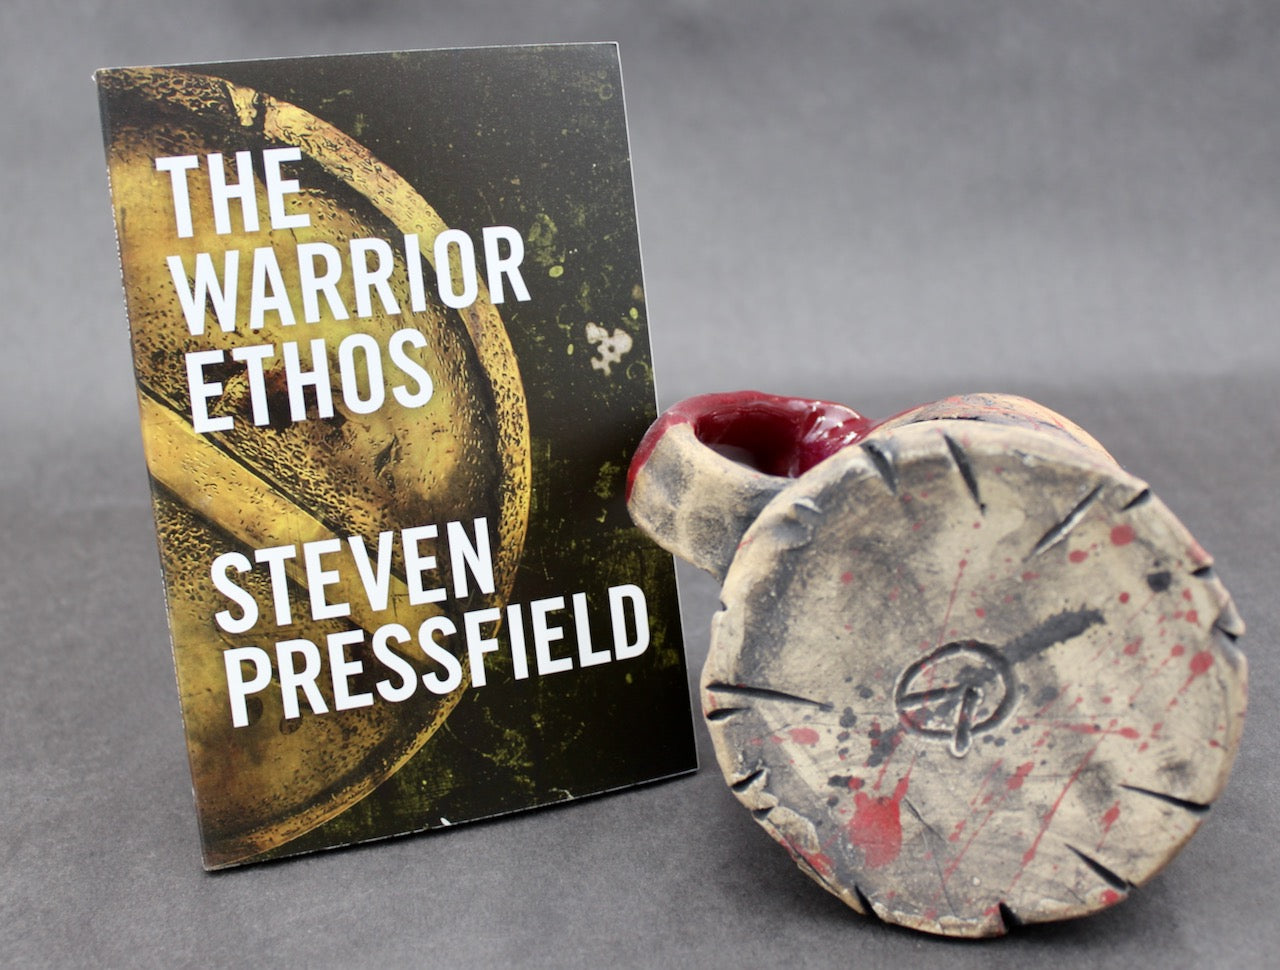 One "Kothon" Spartan Warrior Mug and One Autographed Book, "The Warrior Ethos" by Steven Pressfield (SK7794)